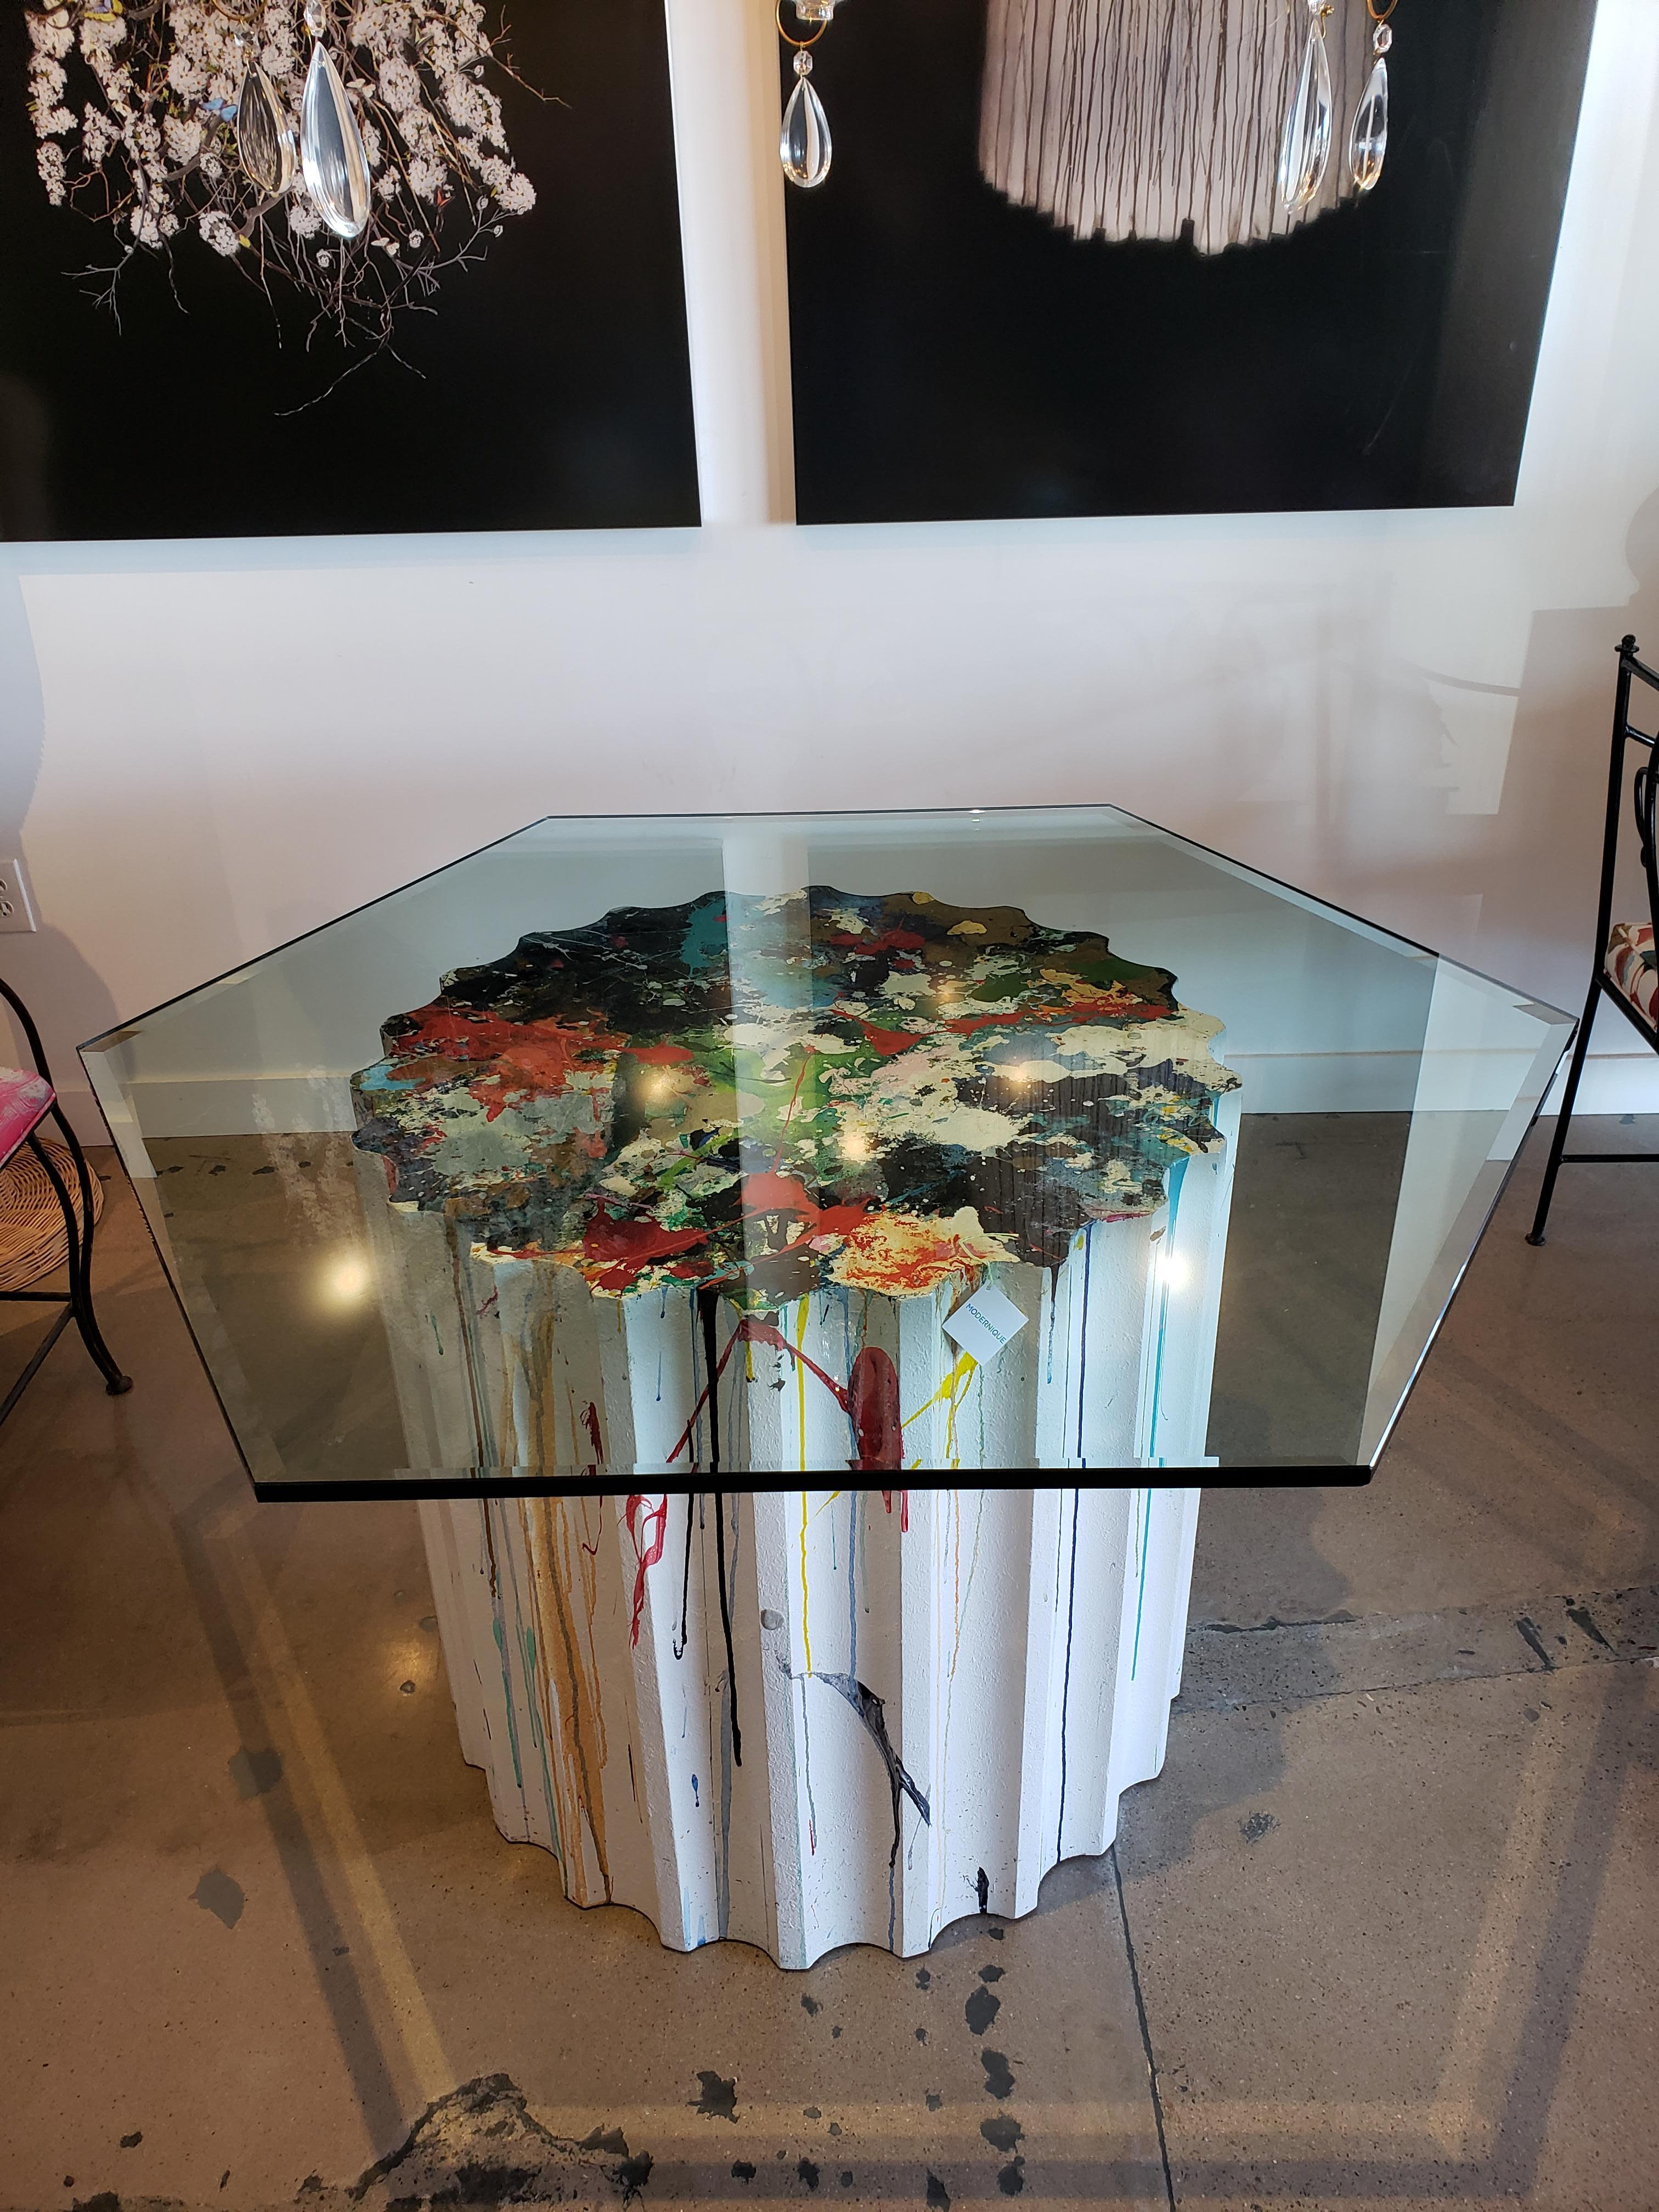 Noted artist, Kelly O'Neal blends into each of his works a modern sensibility with an old world technique. His sense of color is unparalleled and his flair for composition apparent.
This table base is an excellent opportunity to create a stunning